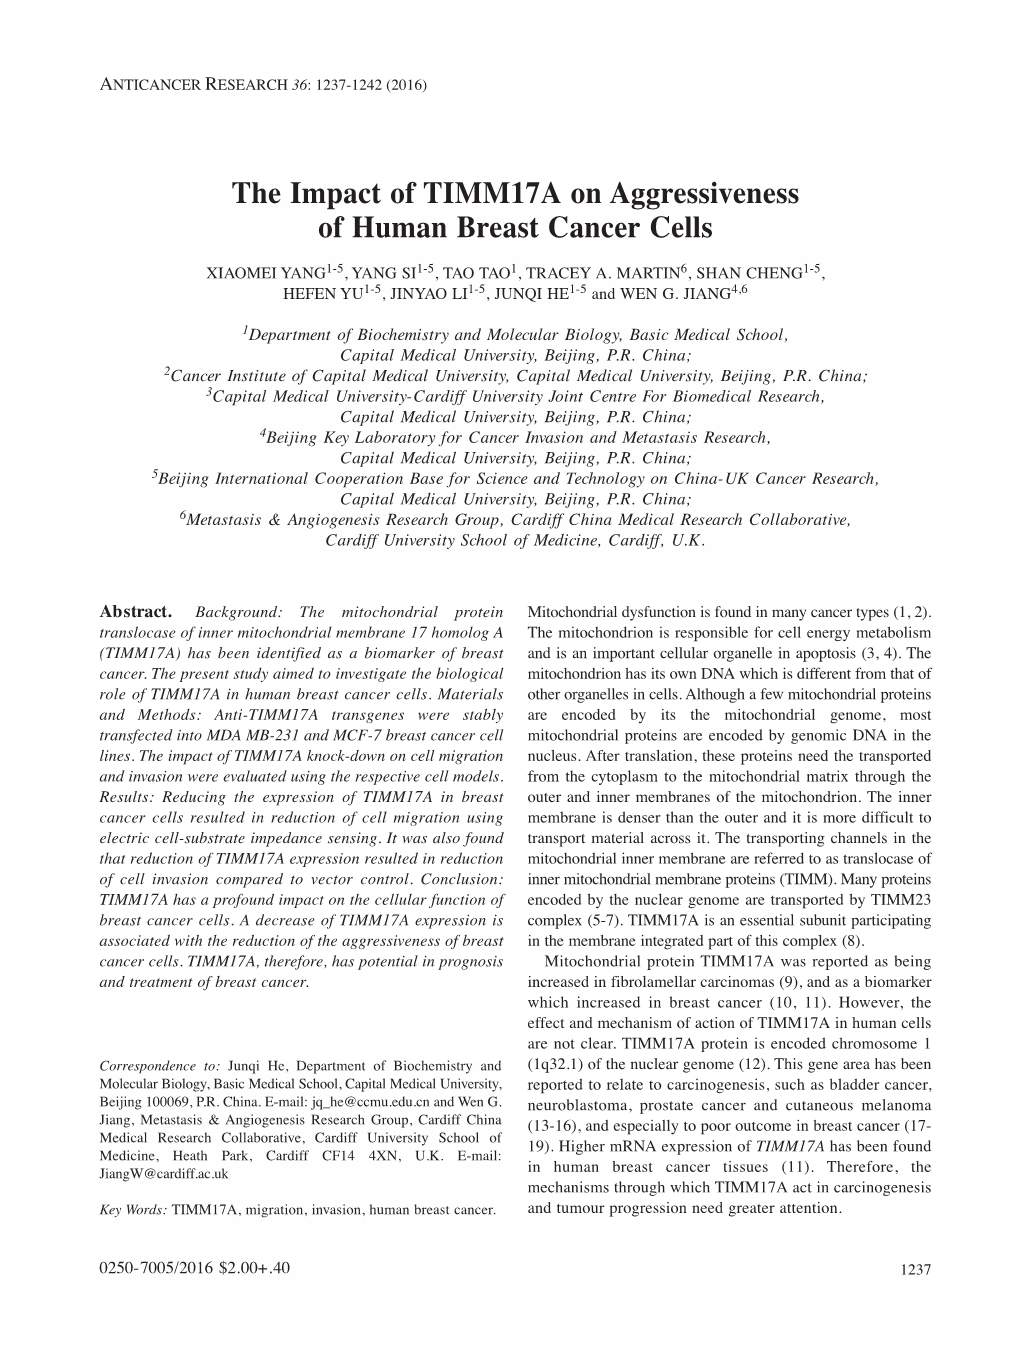 The Impact of TIMM17A on Aggressiveness of Human Breast Cancer Cells